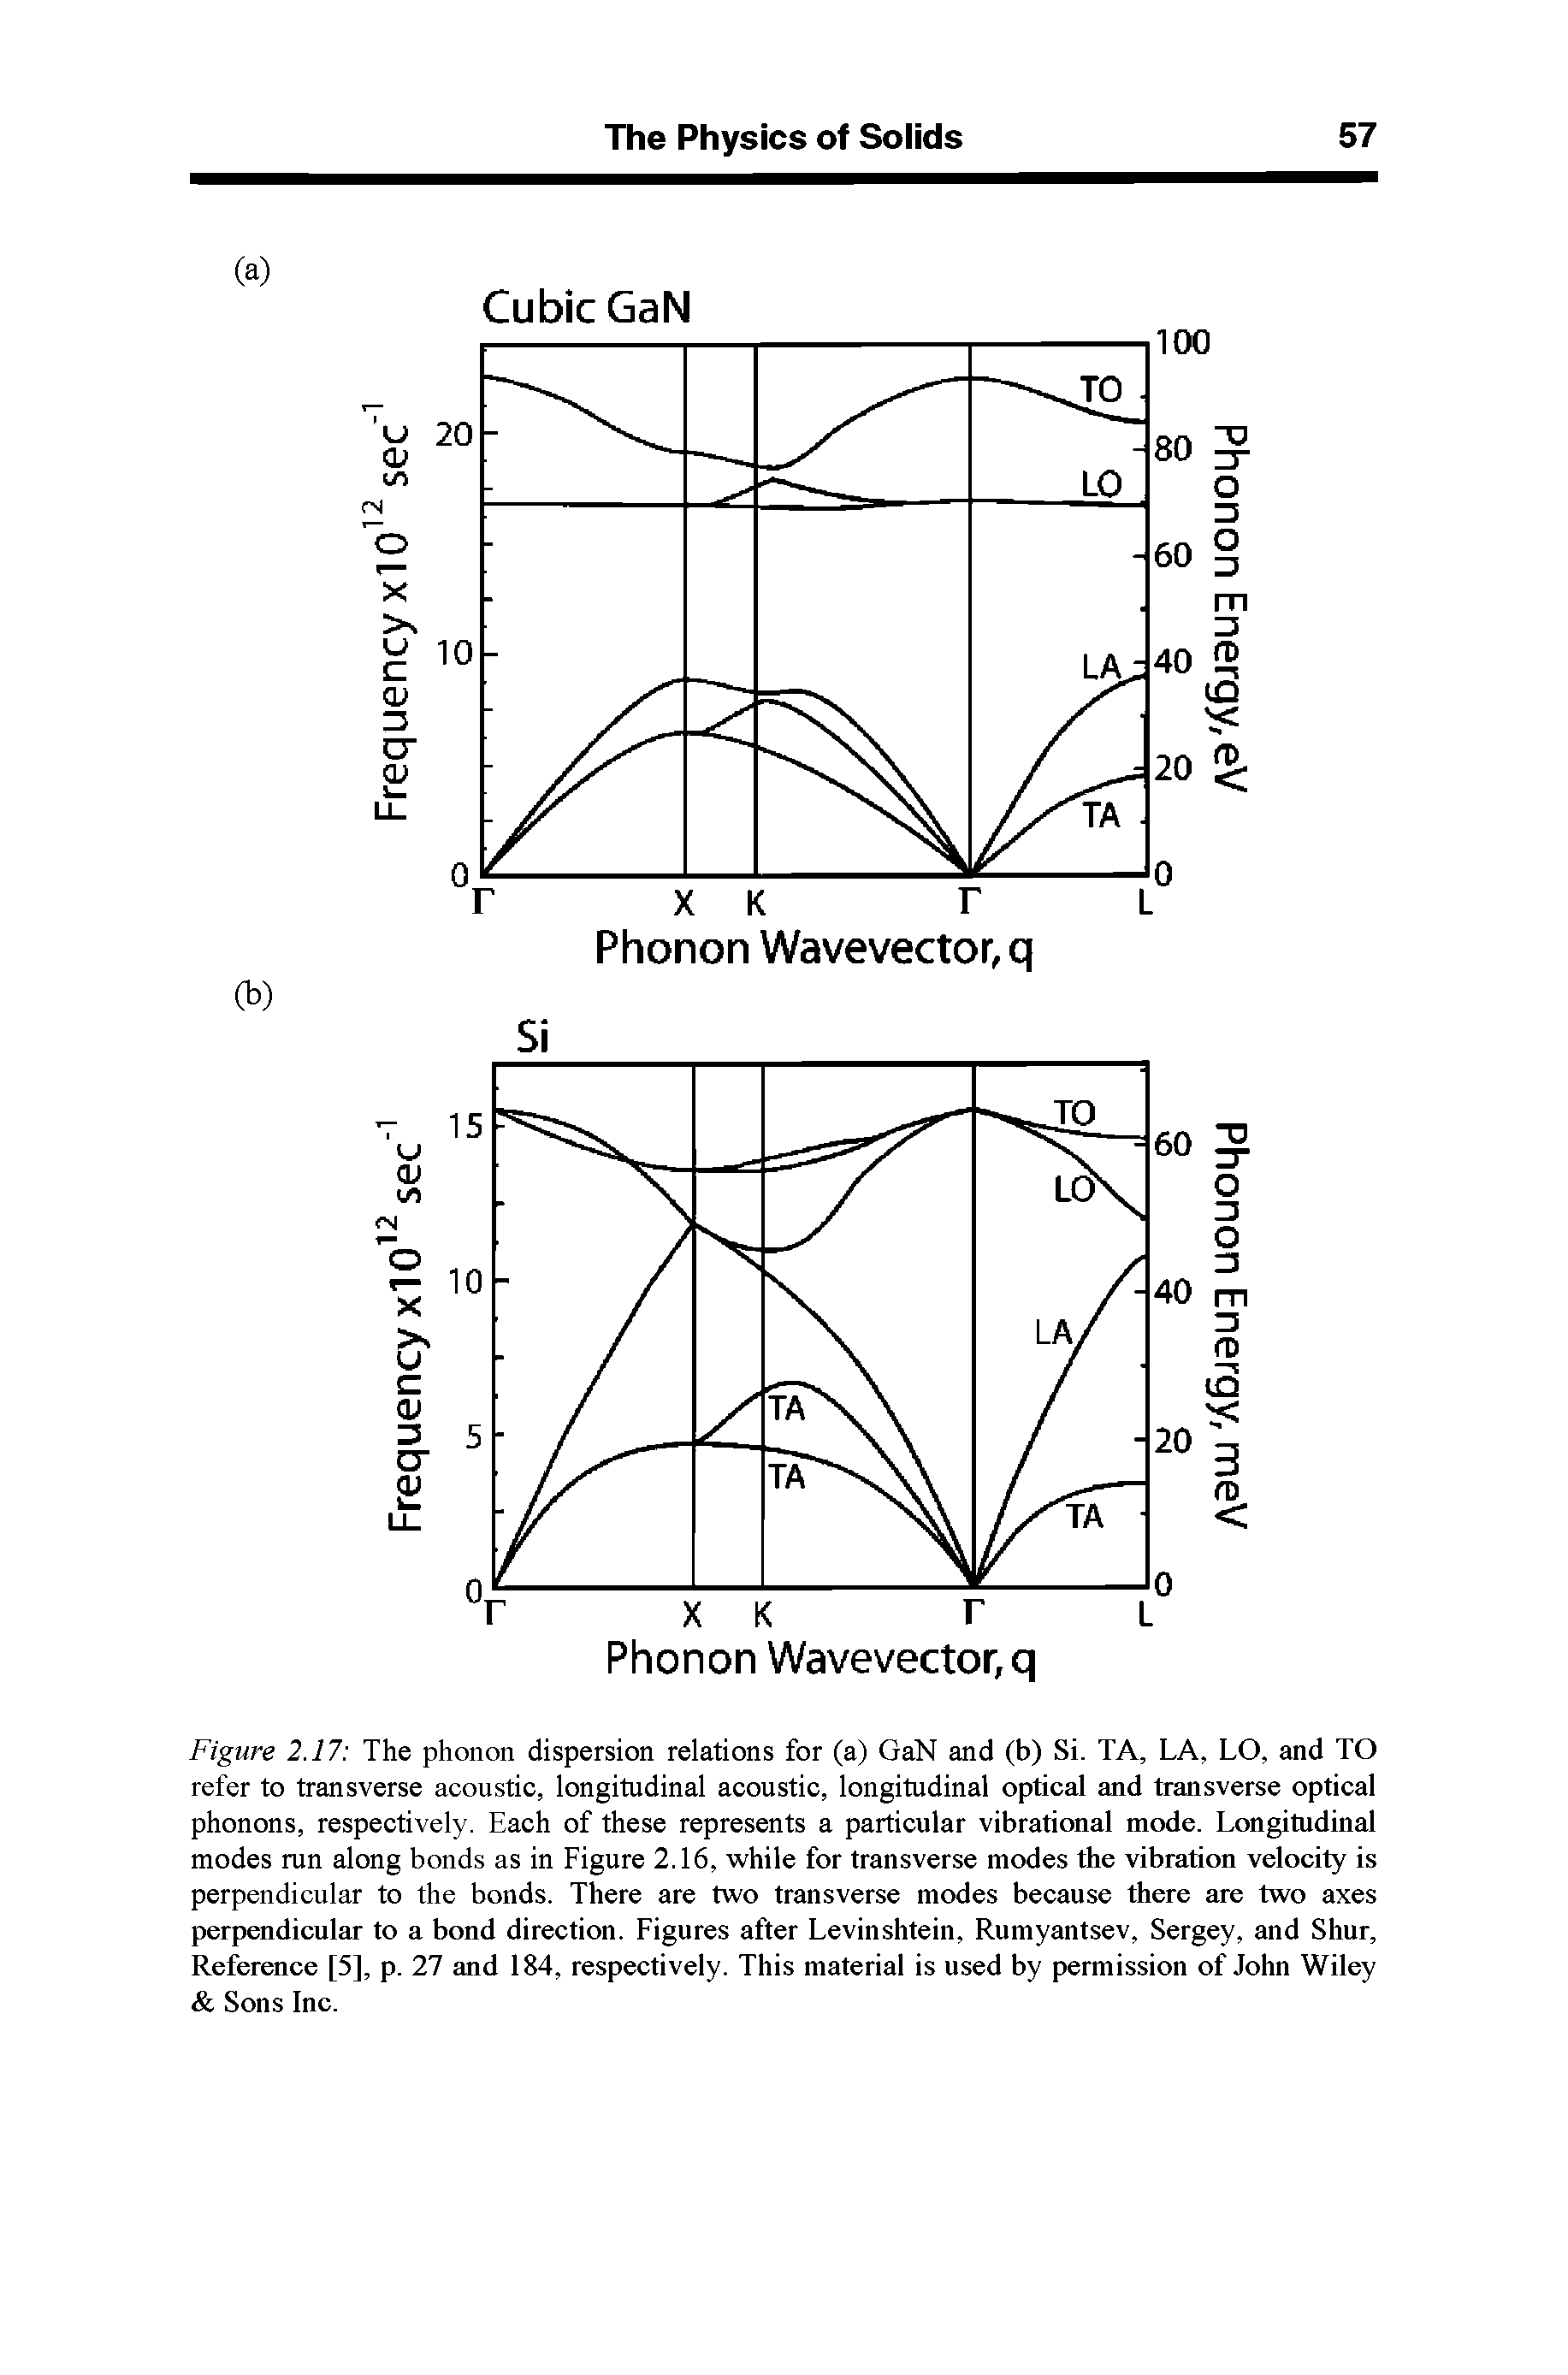 Figure 2.17 The phonon dispersion relations for (a) GaN and (b) Si. TA, LA, LO, and TO refer to transverse acoustic, longitudinal acoustic, longitudinal optical and transverse optical phonons, respectively. Each of these represents a particular vibrational mode. Longitudinal modes run along bonds as in Figure 2.16, while for transverse modes the vibration velocity is perpendicular to the bonds. There are two transverse modes because there are two axes perpendicular to a bond direction. Figures after Levinshtein, Rumyantsev, Sergey, and Shur, Reference [5], p. 27 and 184, respectively. This material is used by permission of John Wiley Sons Inc.